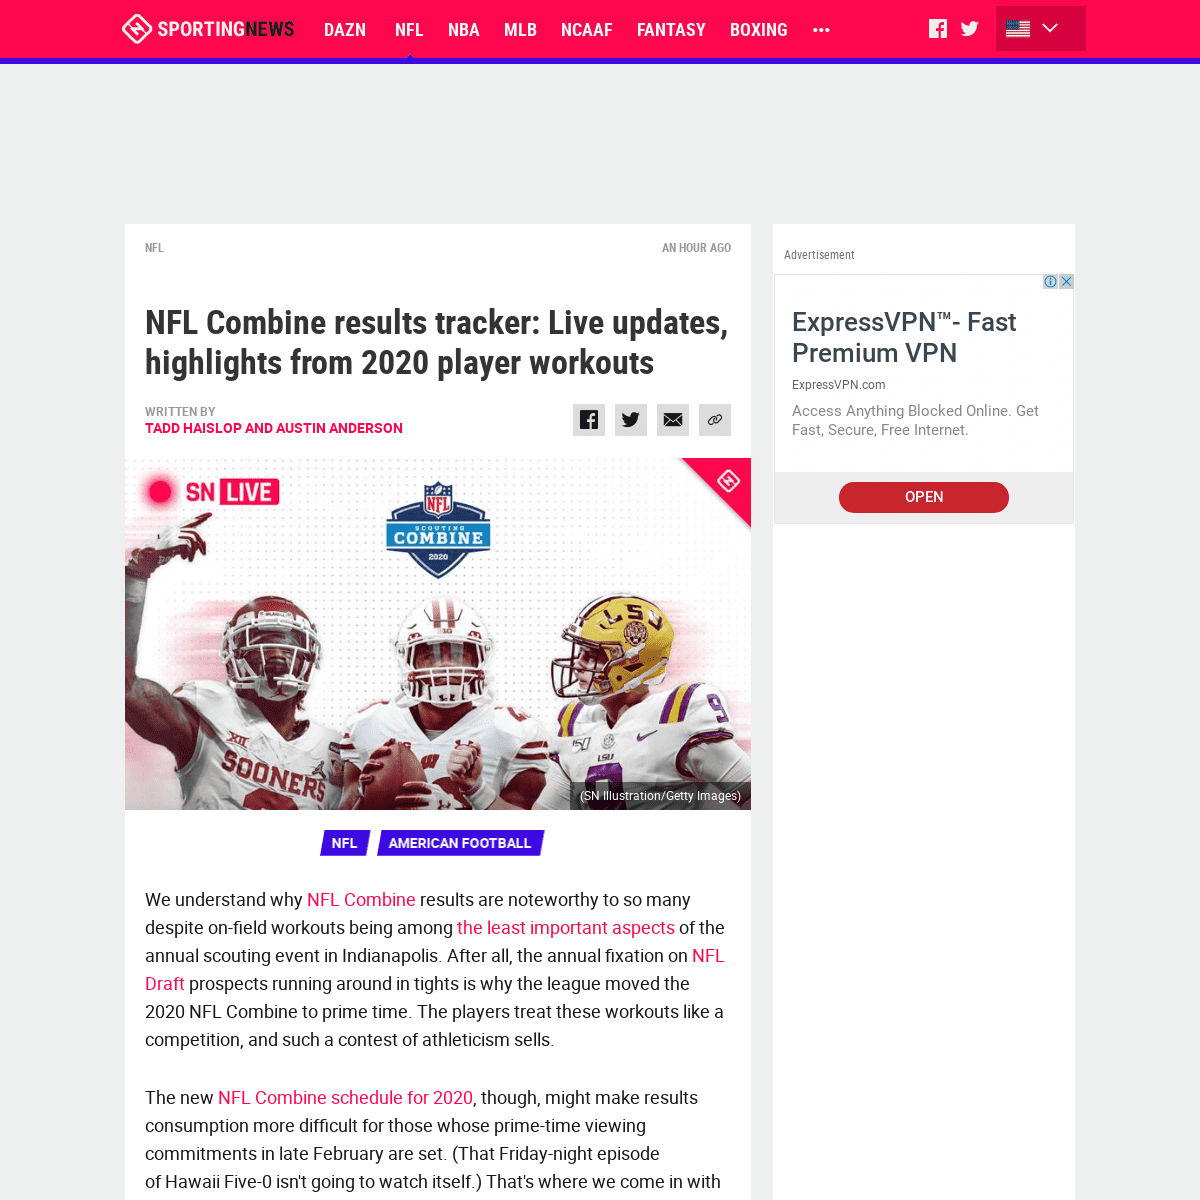 A complete backup of www.sportingnews.com/us/nfl/news/nfl-combine-results-2020-live-updates-highlights-workouts/113o7aq8dwr031ed